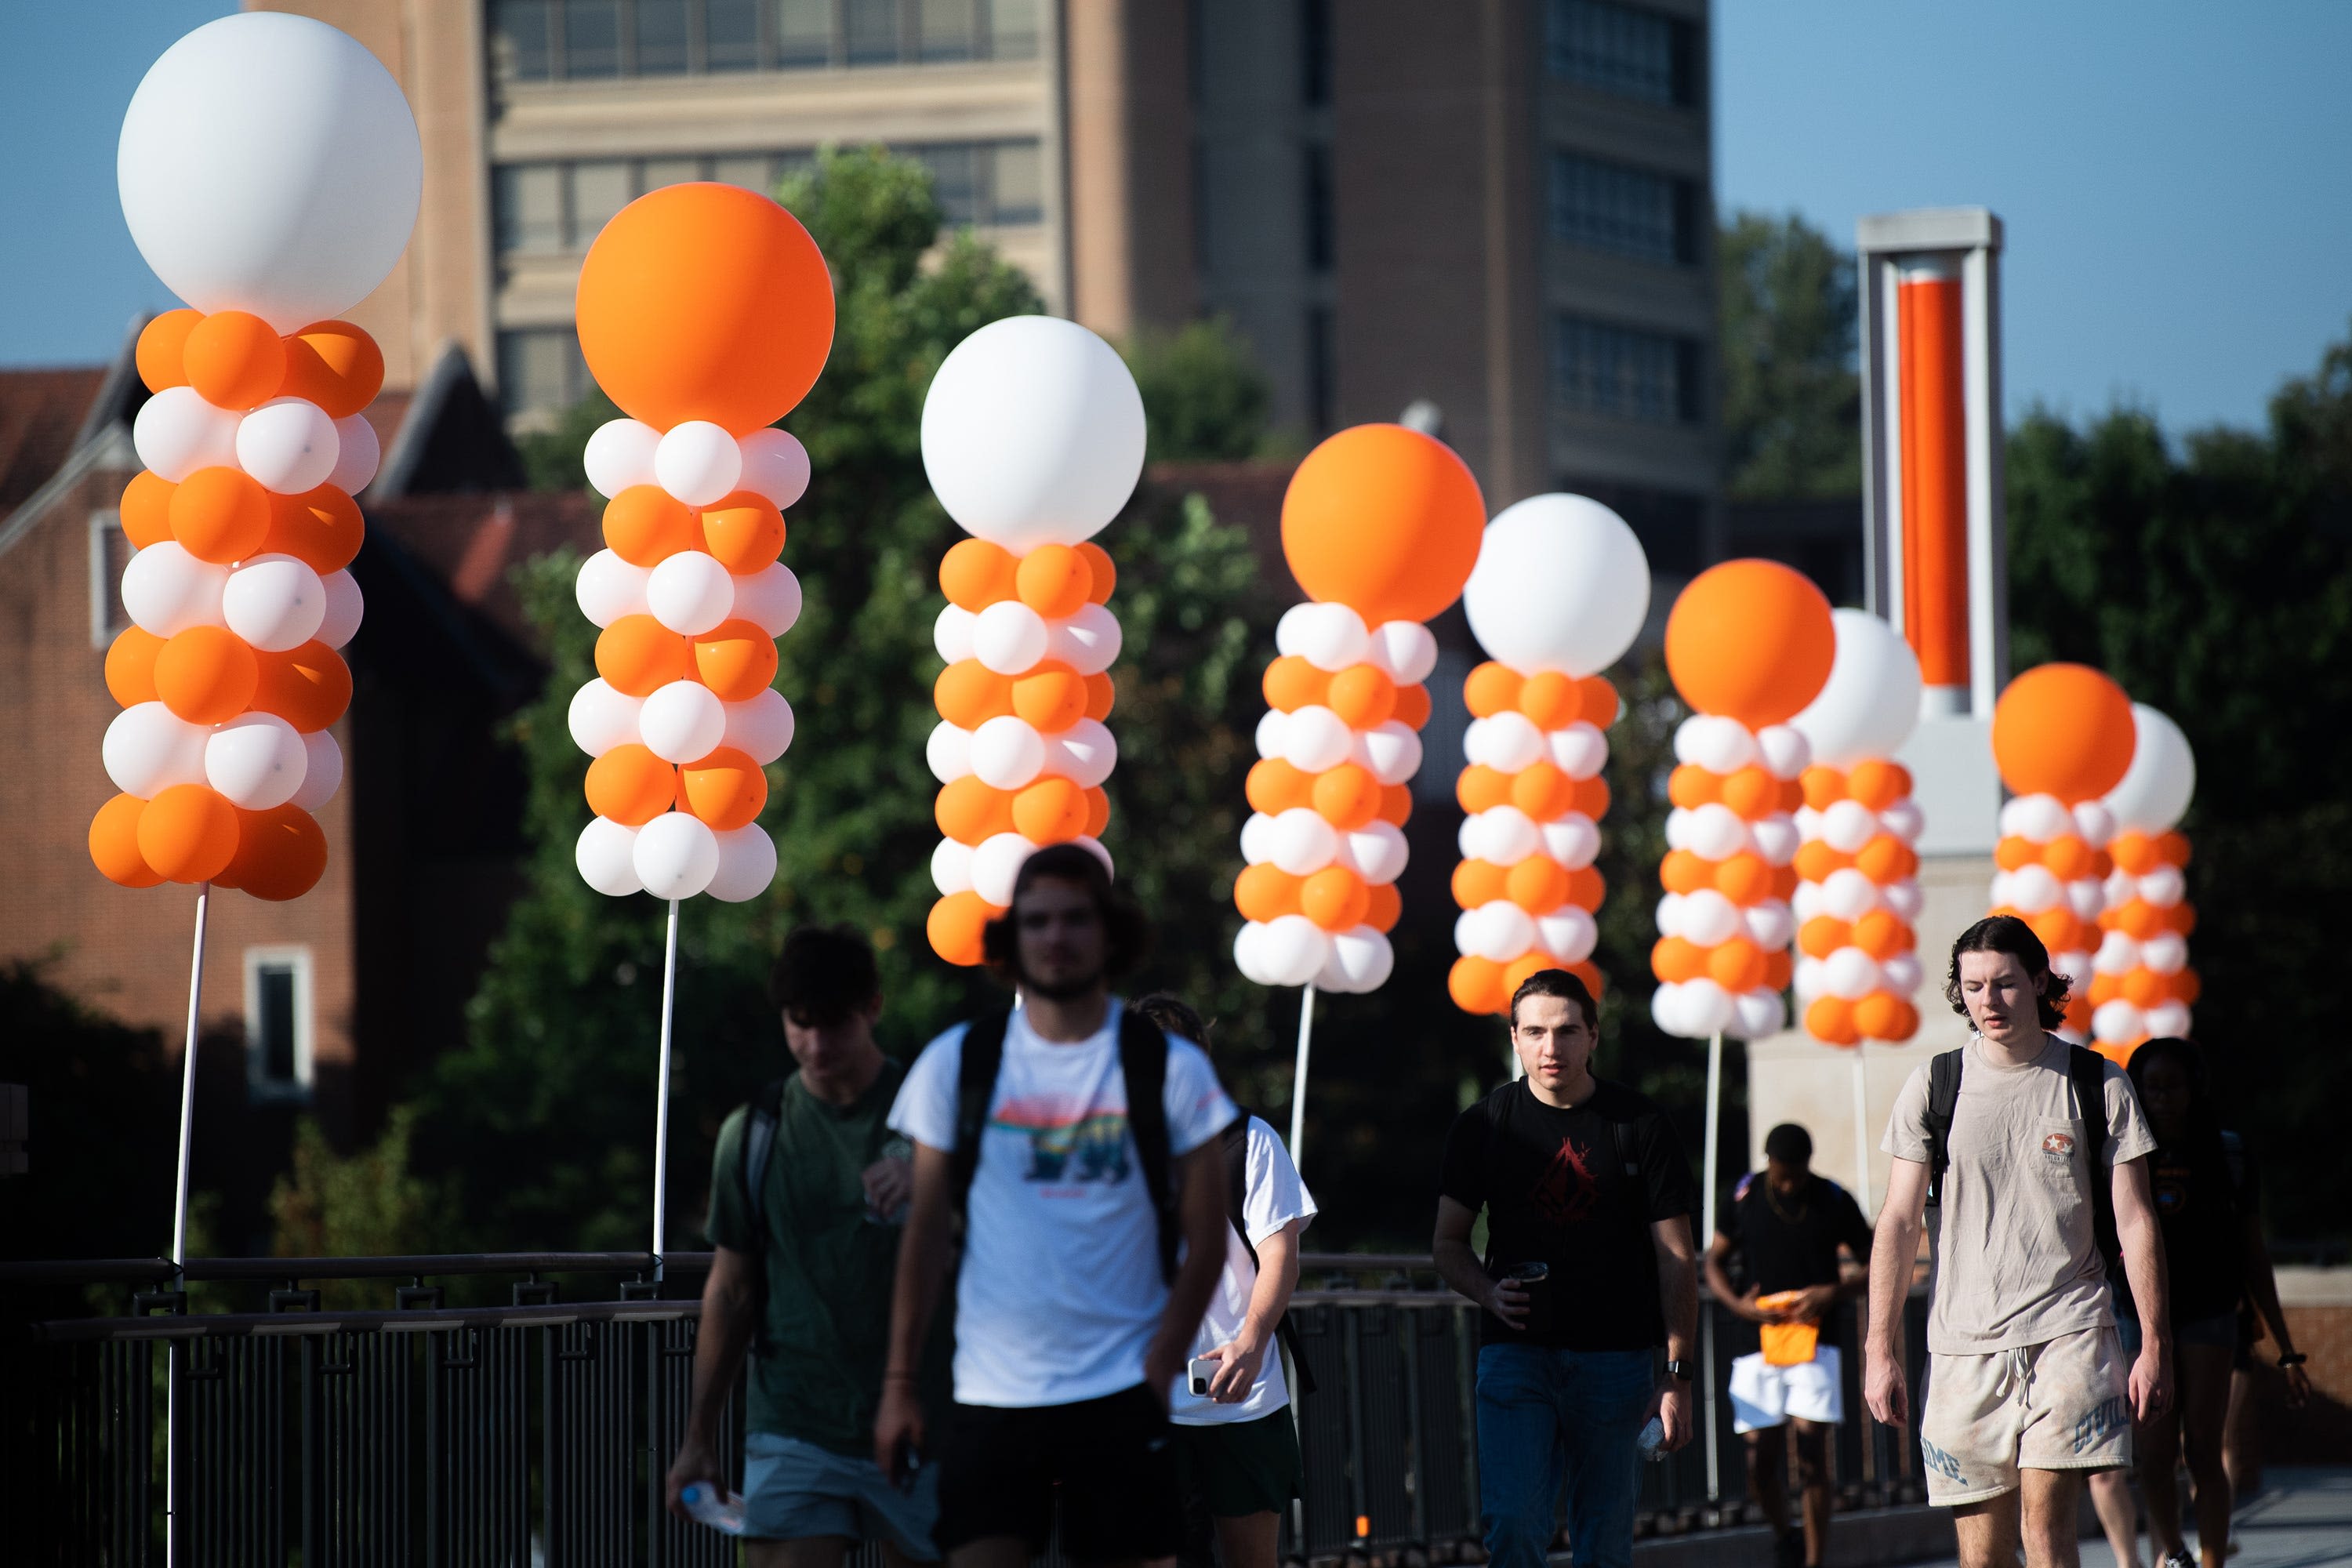 Important dates and costs University of Tennessee families must know before fall semester